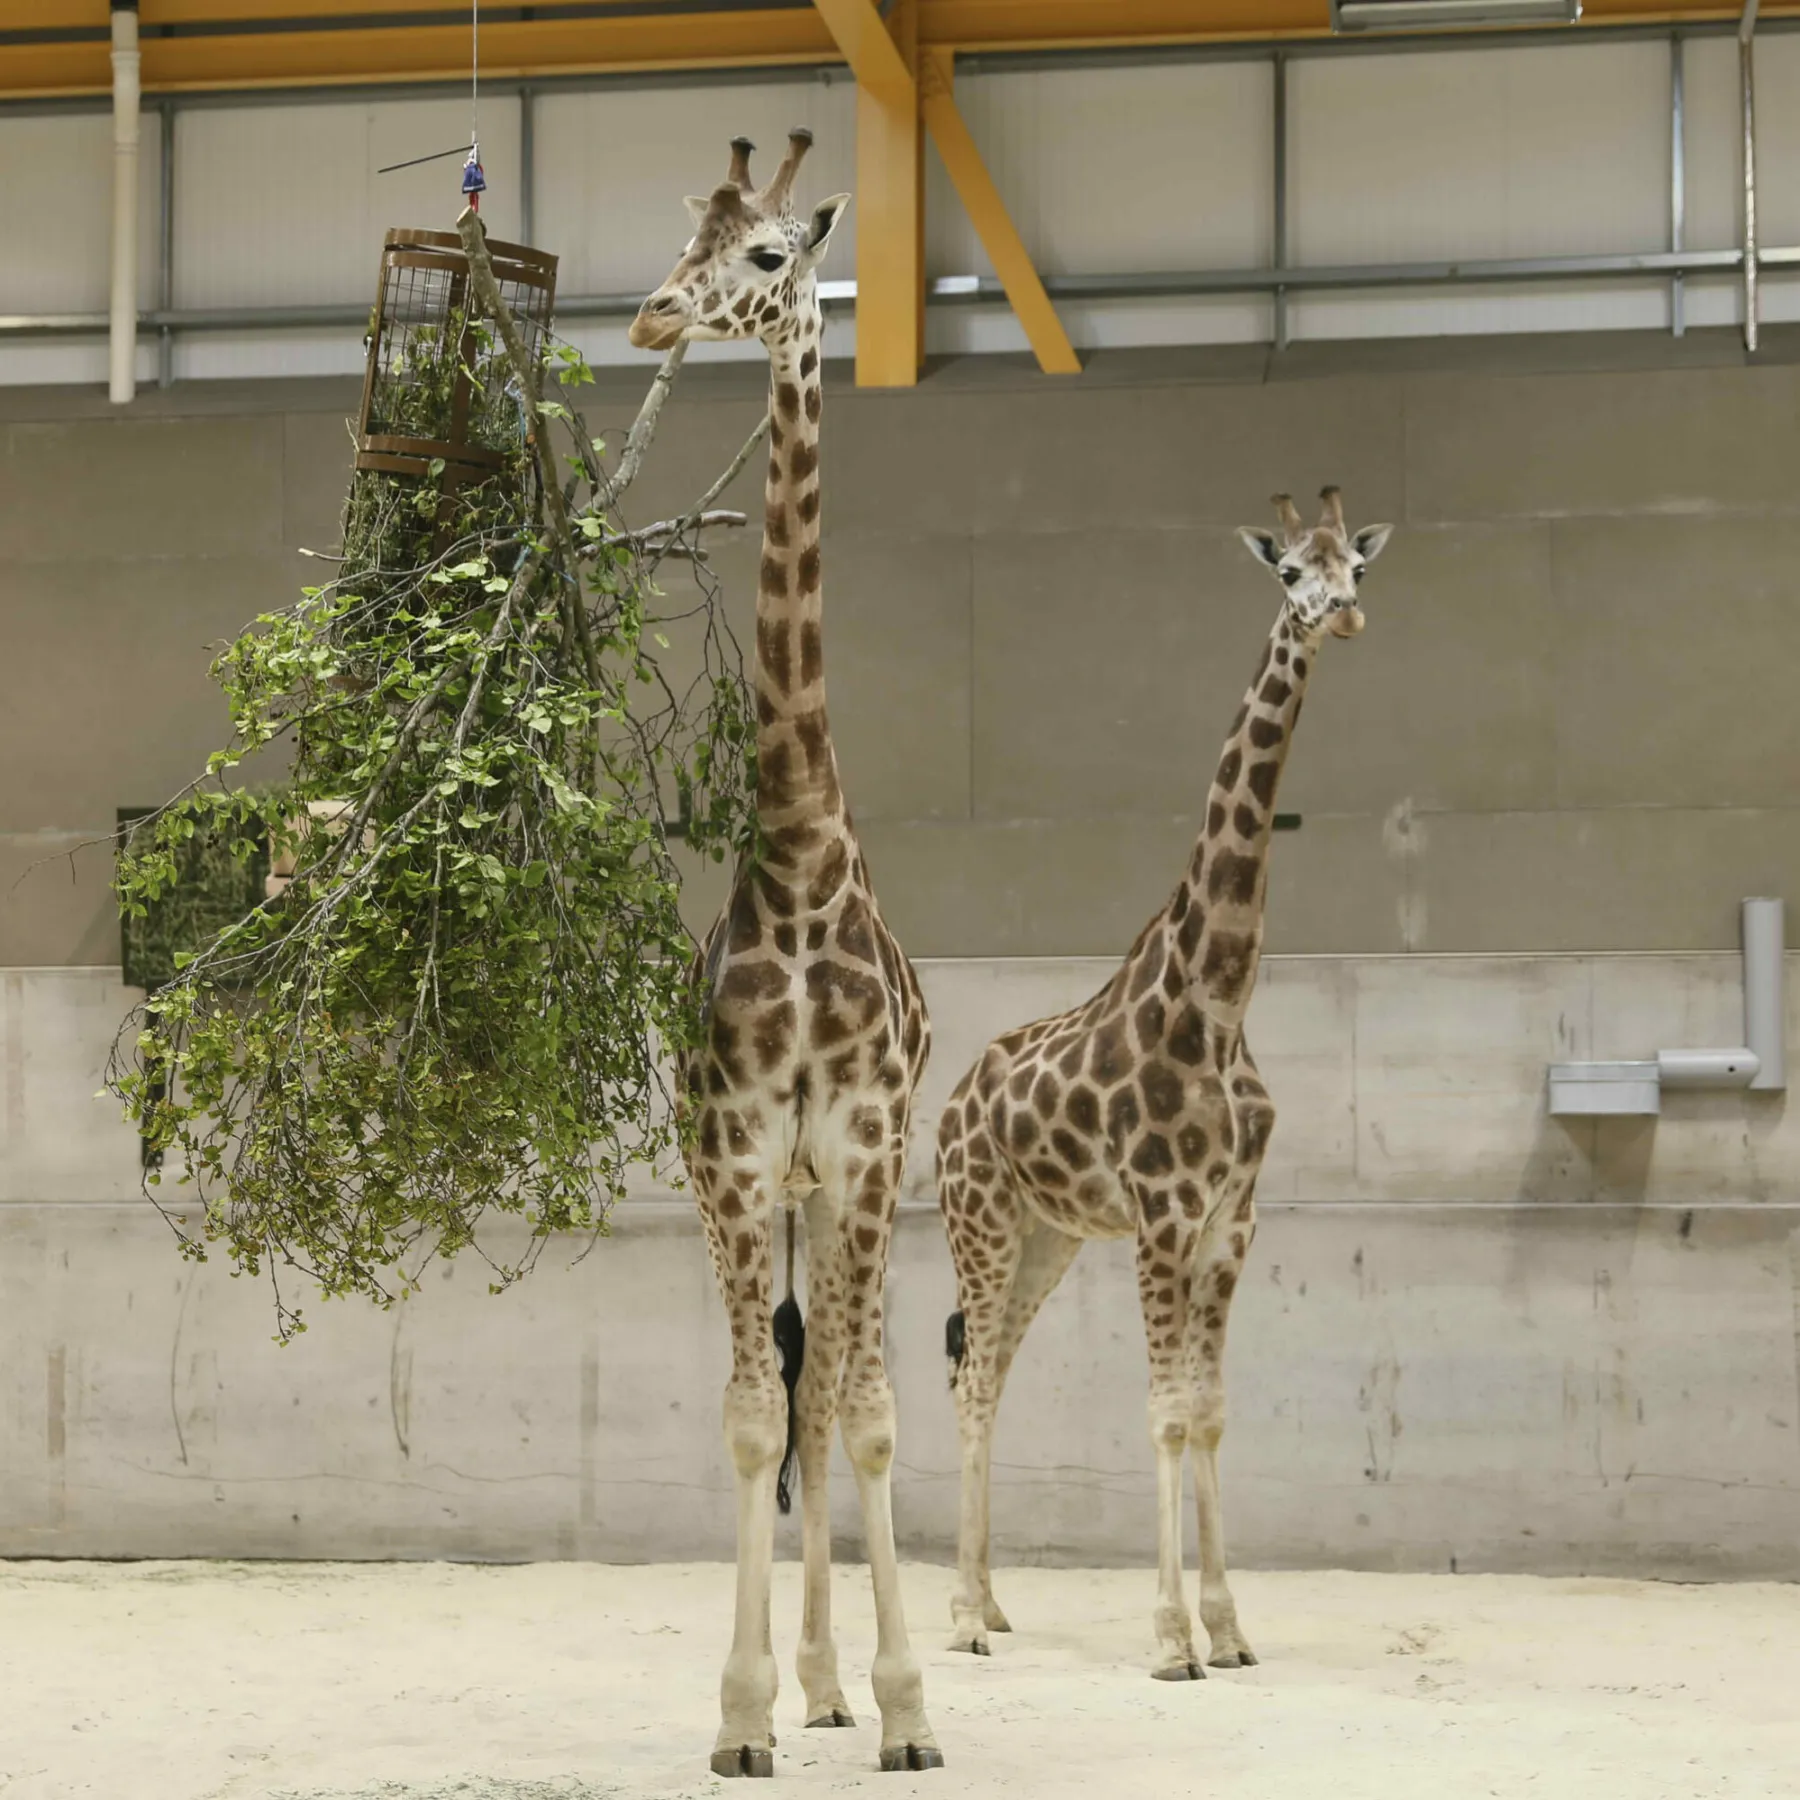 Two giraffes in the new Giraffe House at Edinburgh Zoo. Foliage hangs from the ceiling of the spacious shed.